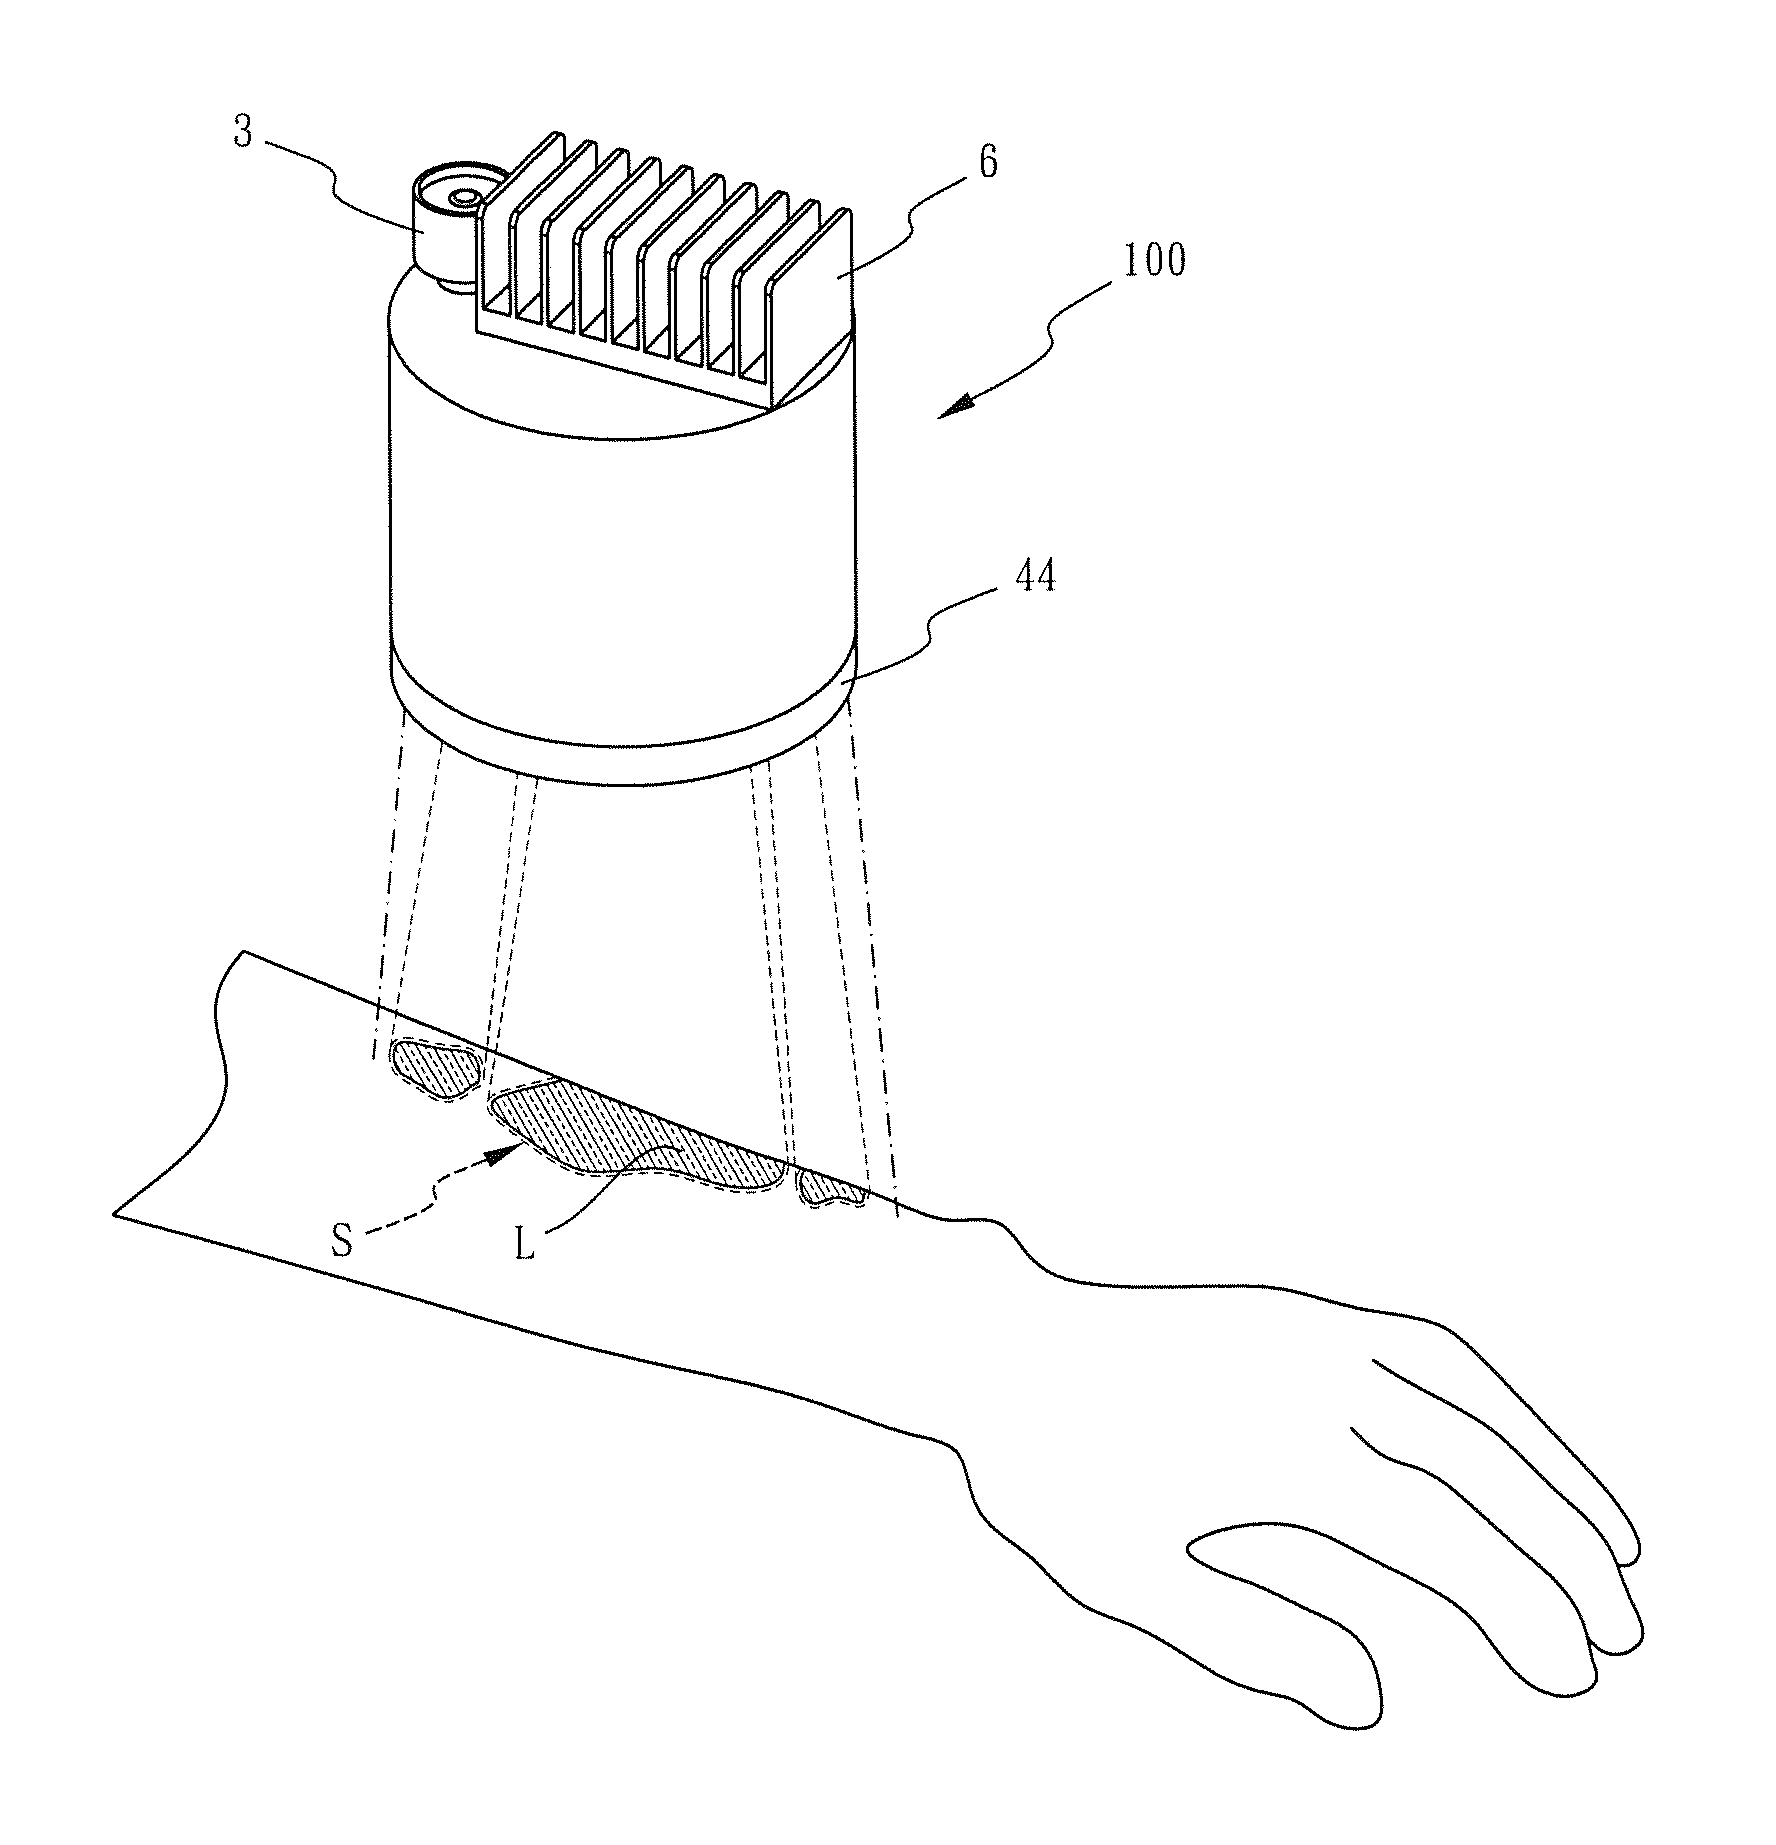 Portable phototherapy apparatus for psoriasis